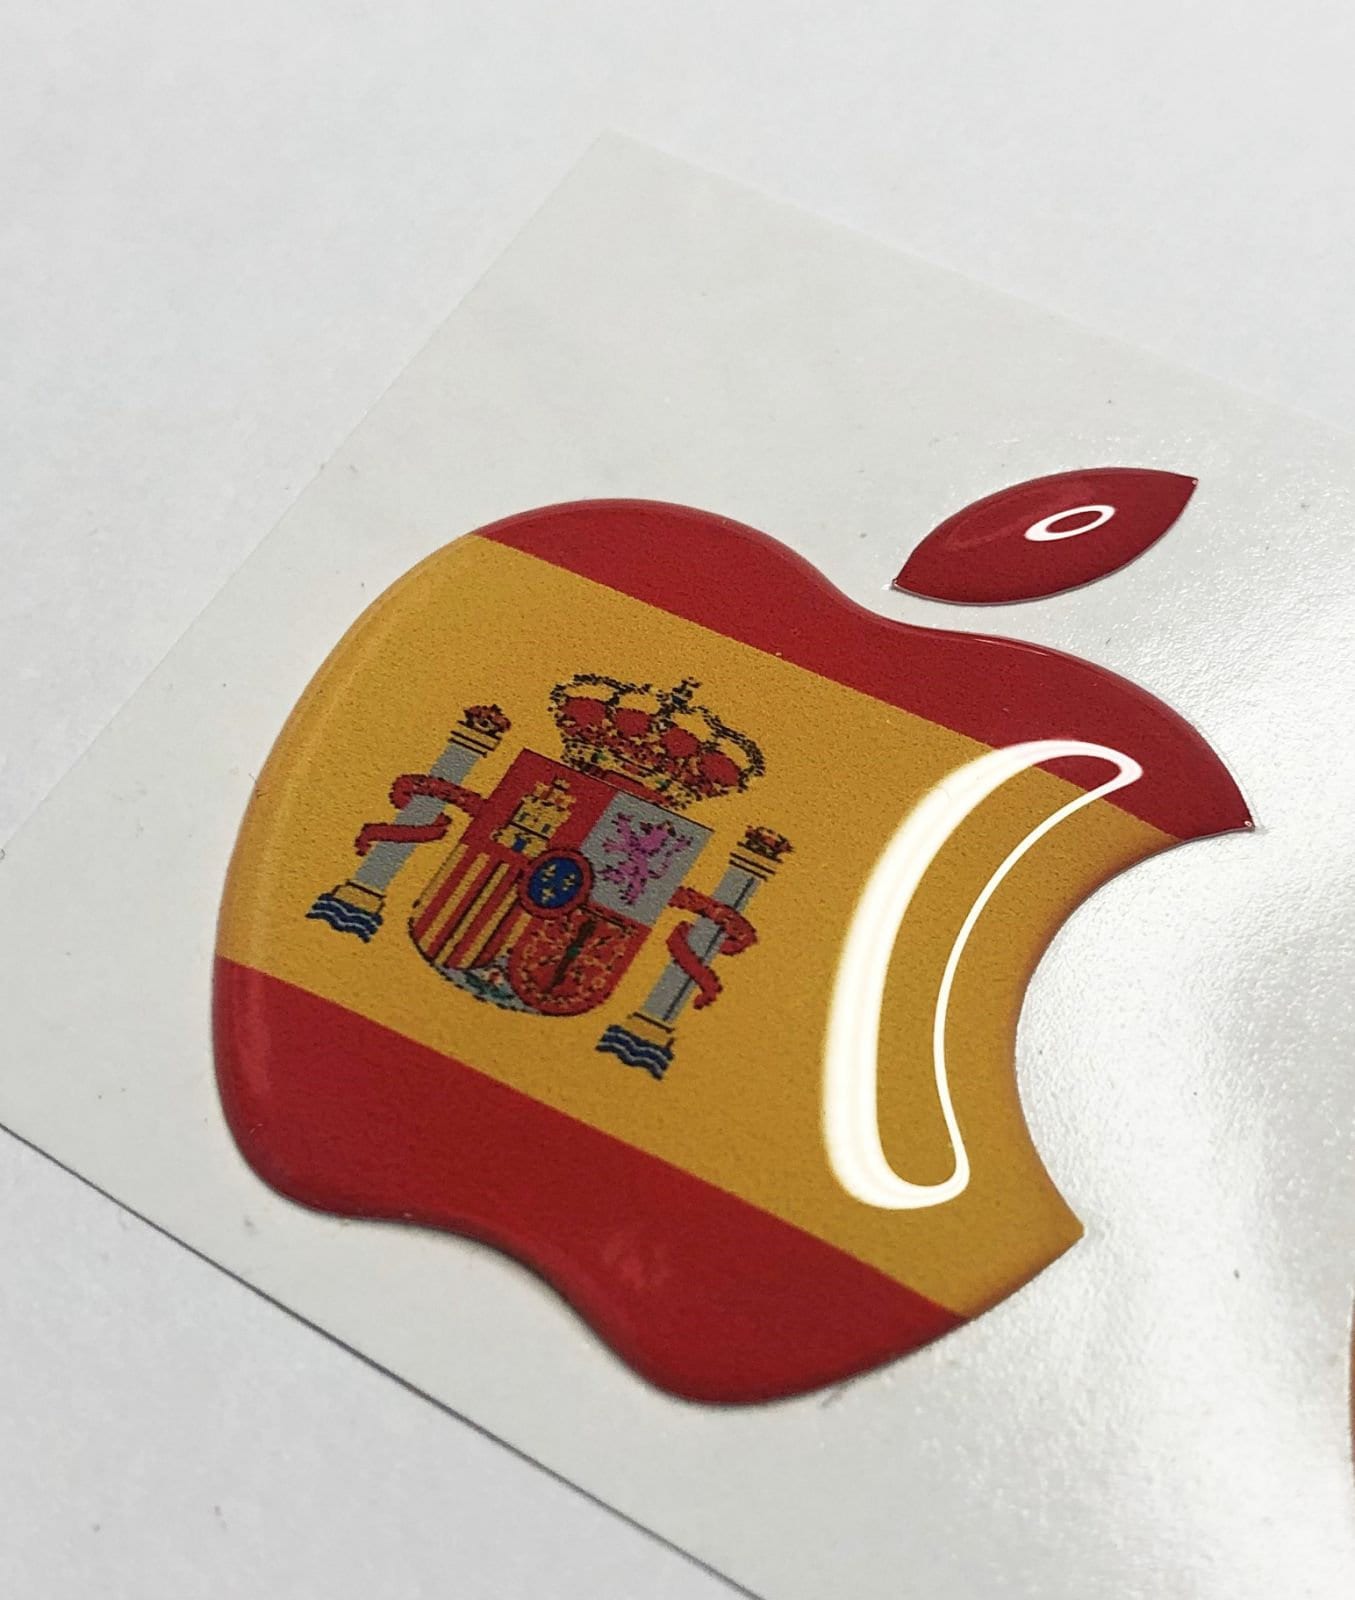 1pcs. 3D Mirror Domed Apple logo stickers for iPhone, iPad cover. Size  50x43 mm